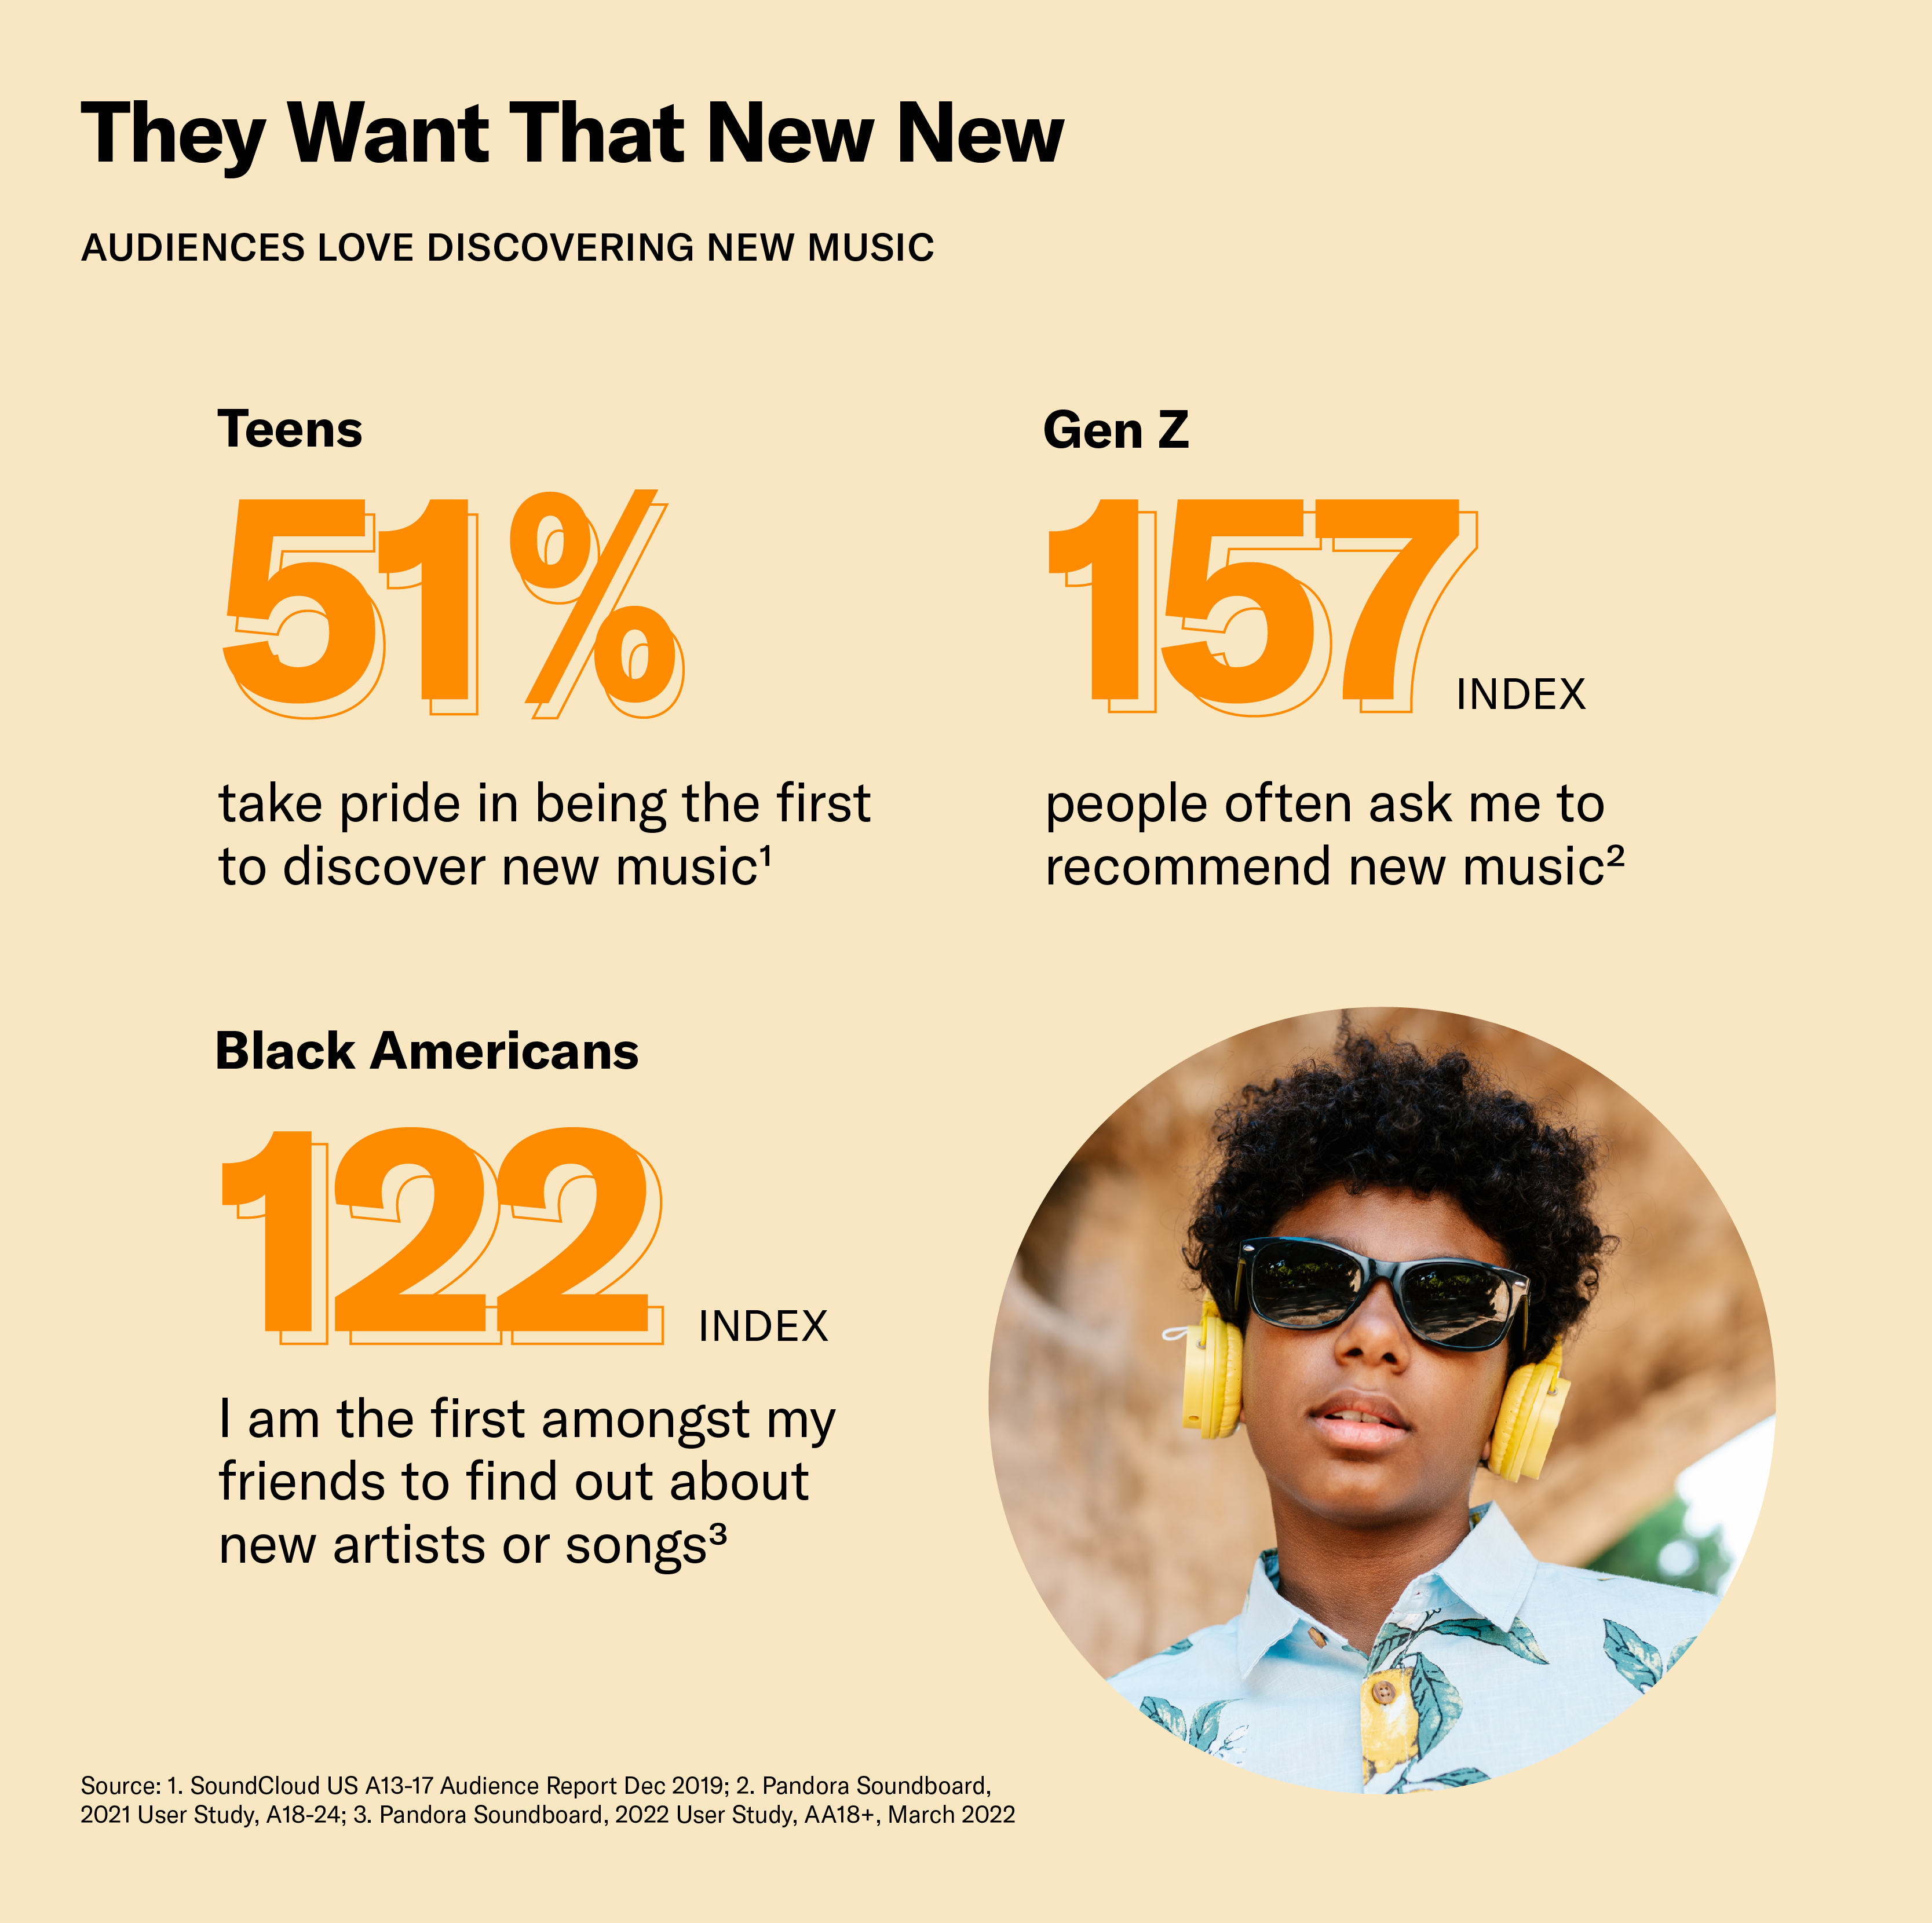 Young and multicultural audiences love discovering new music